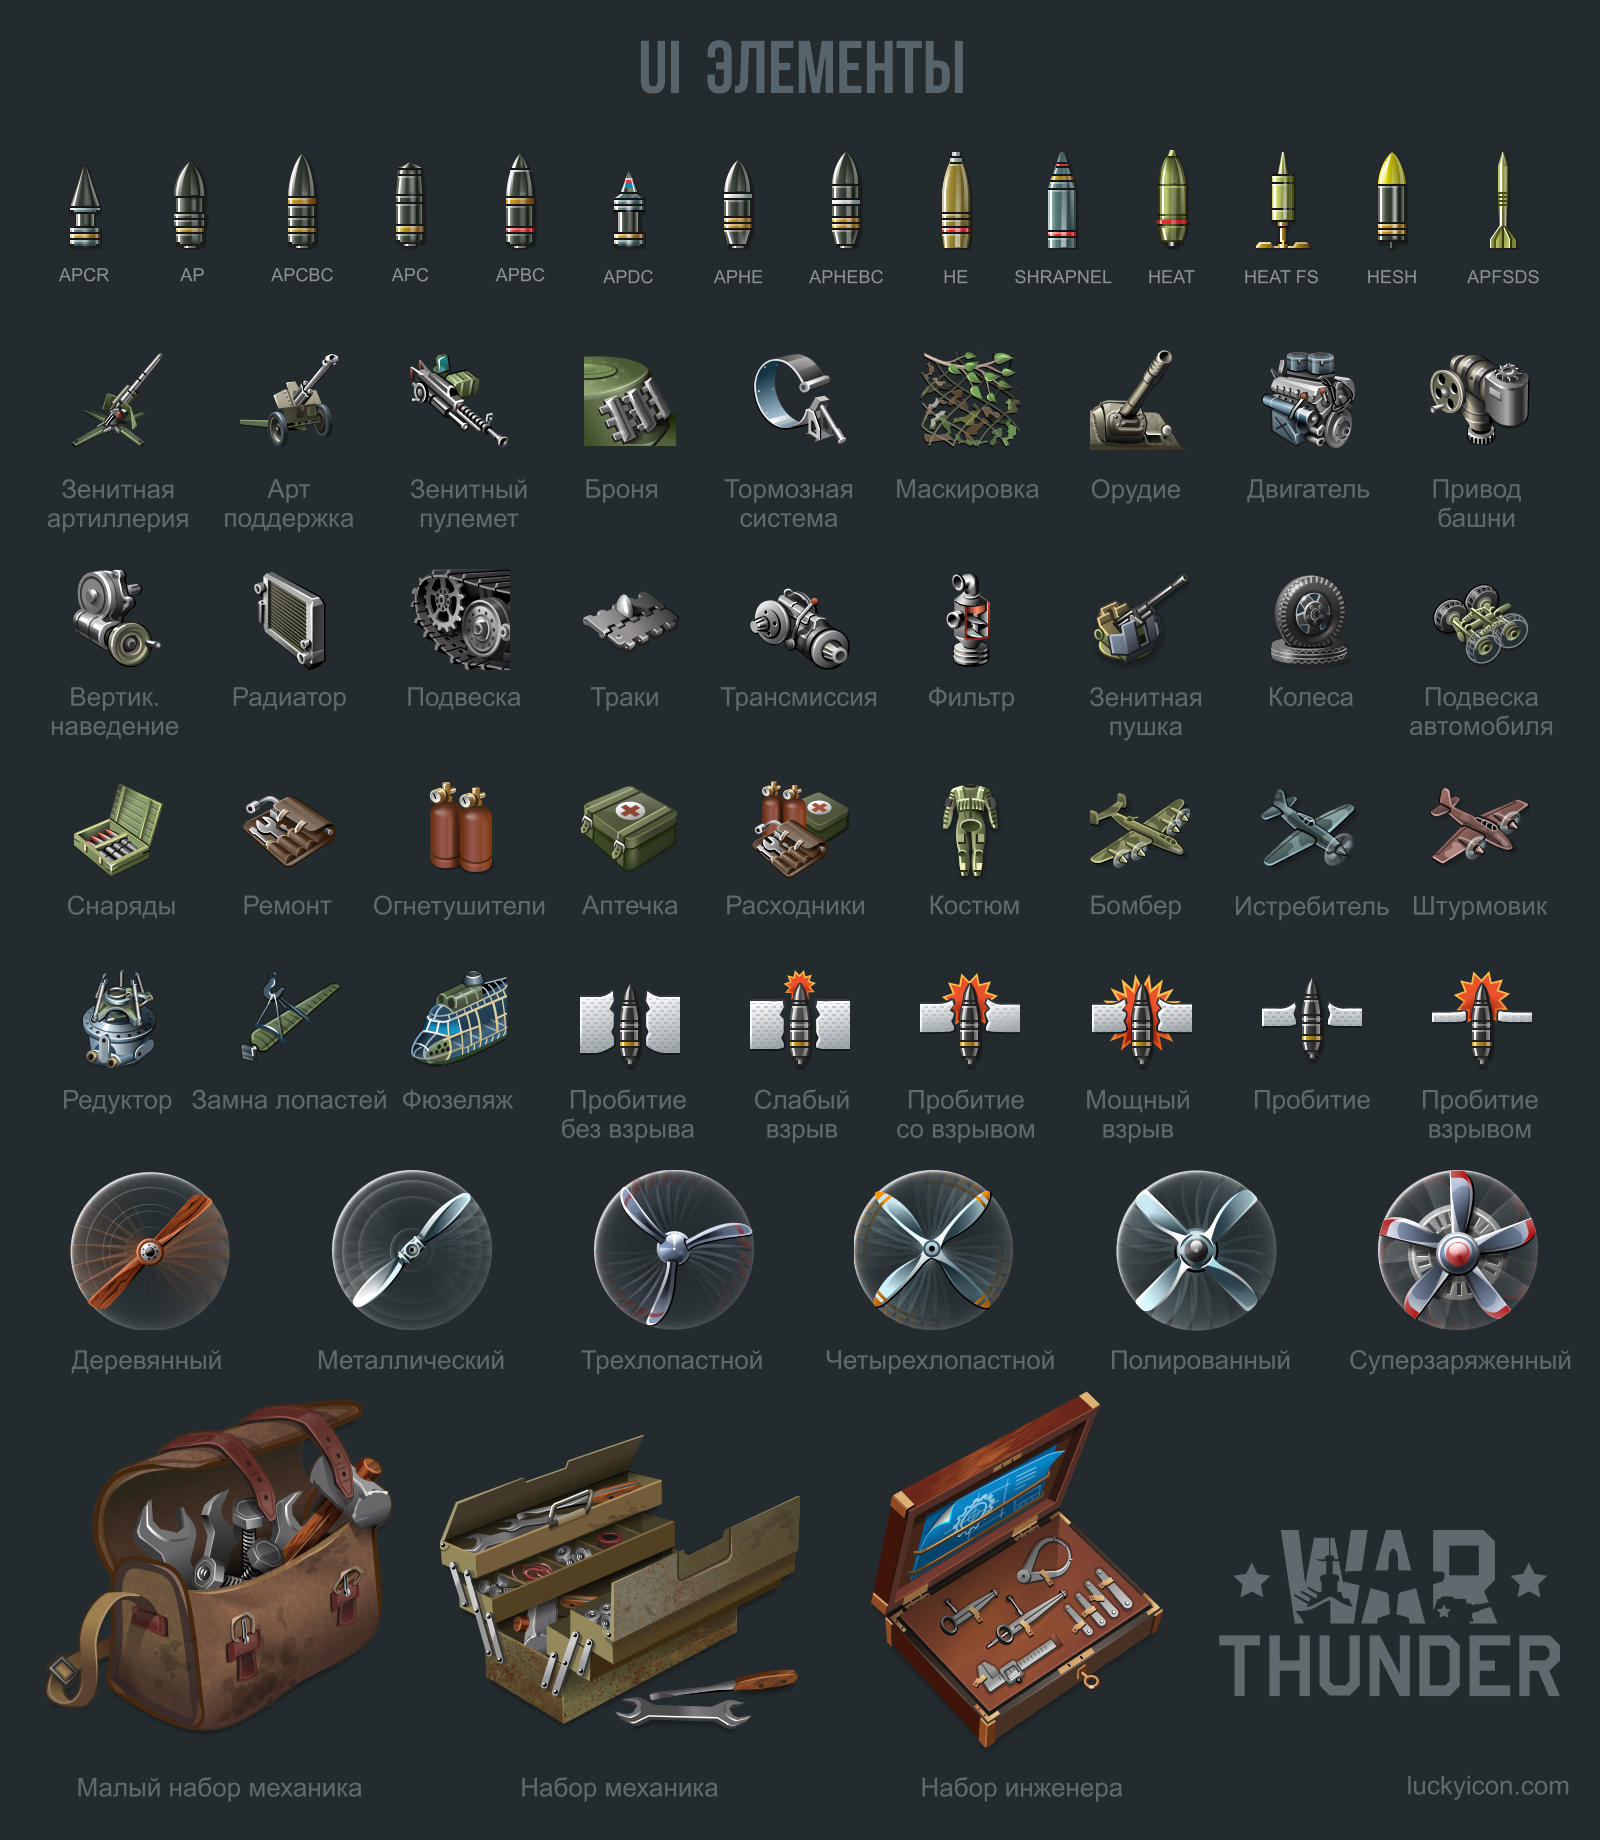 Equipment's icons for the game War Thunder.